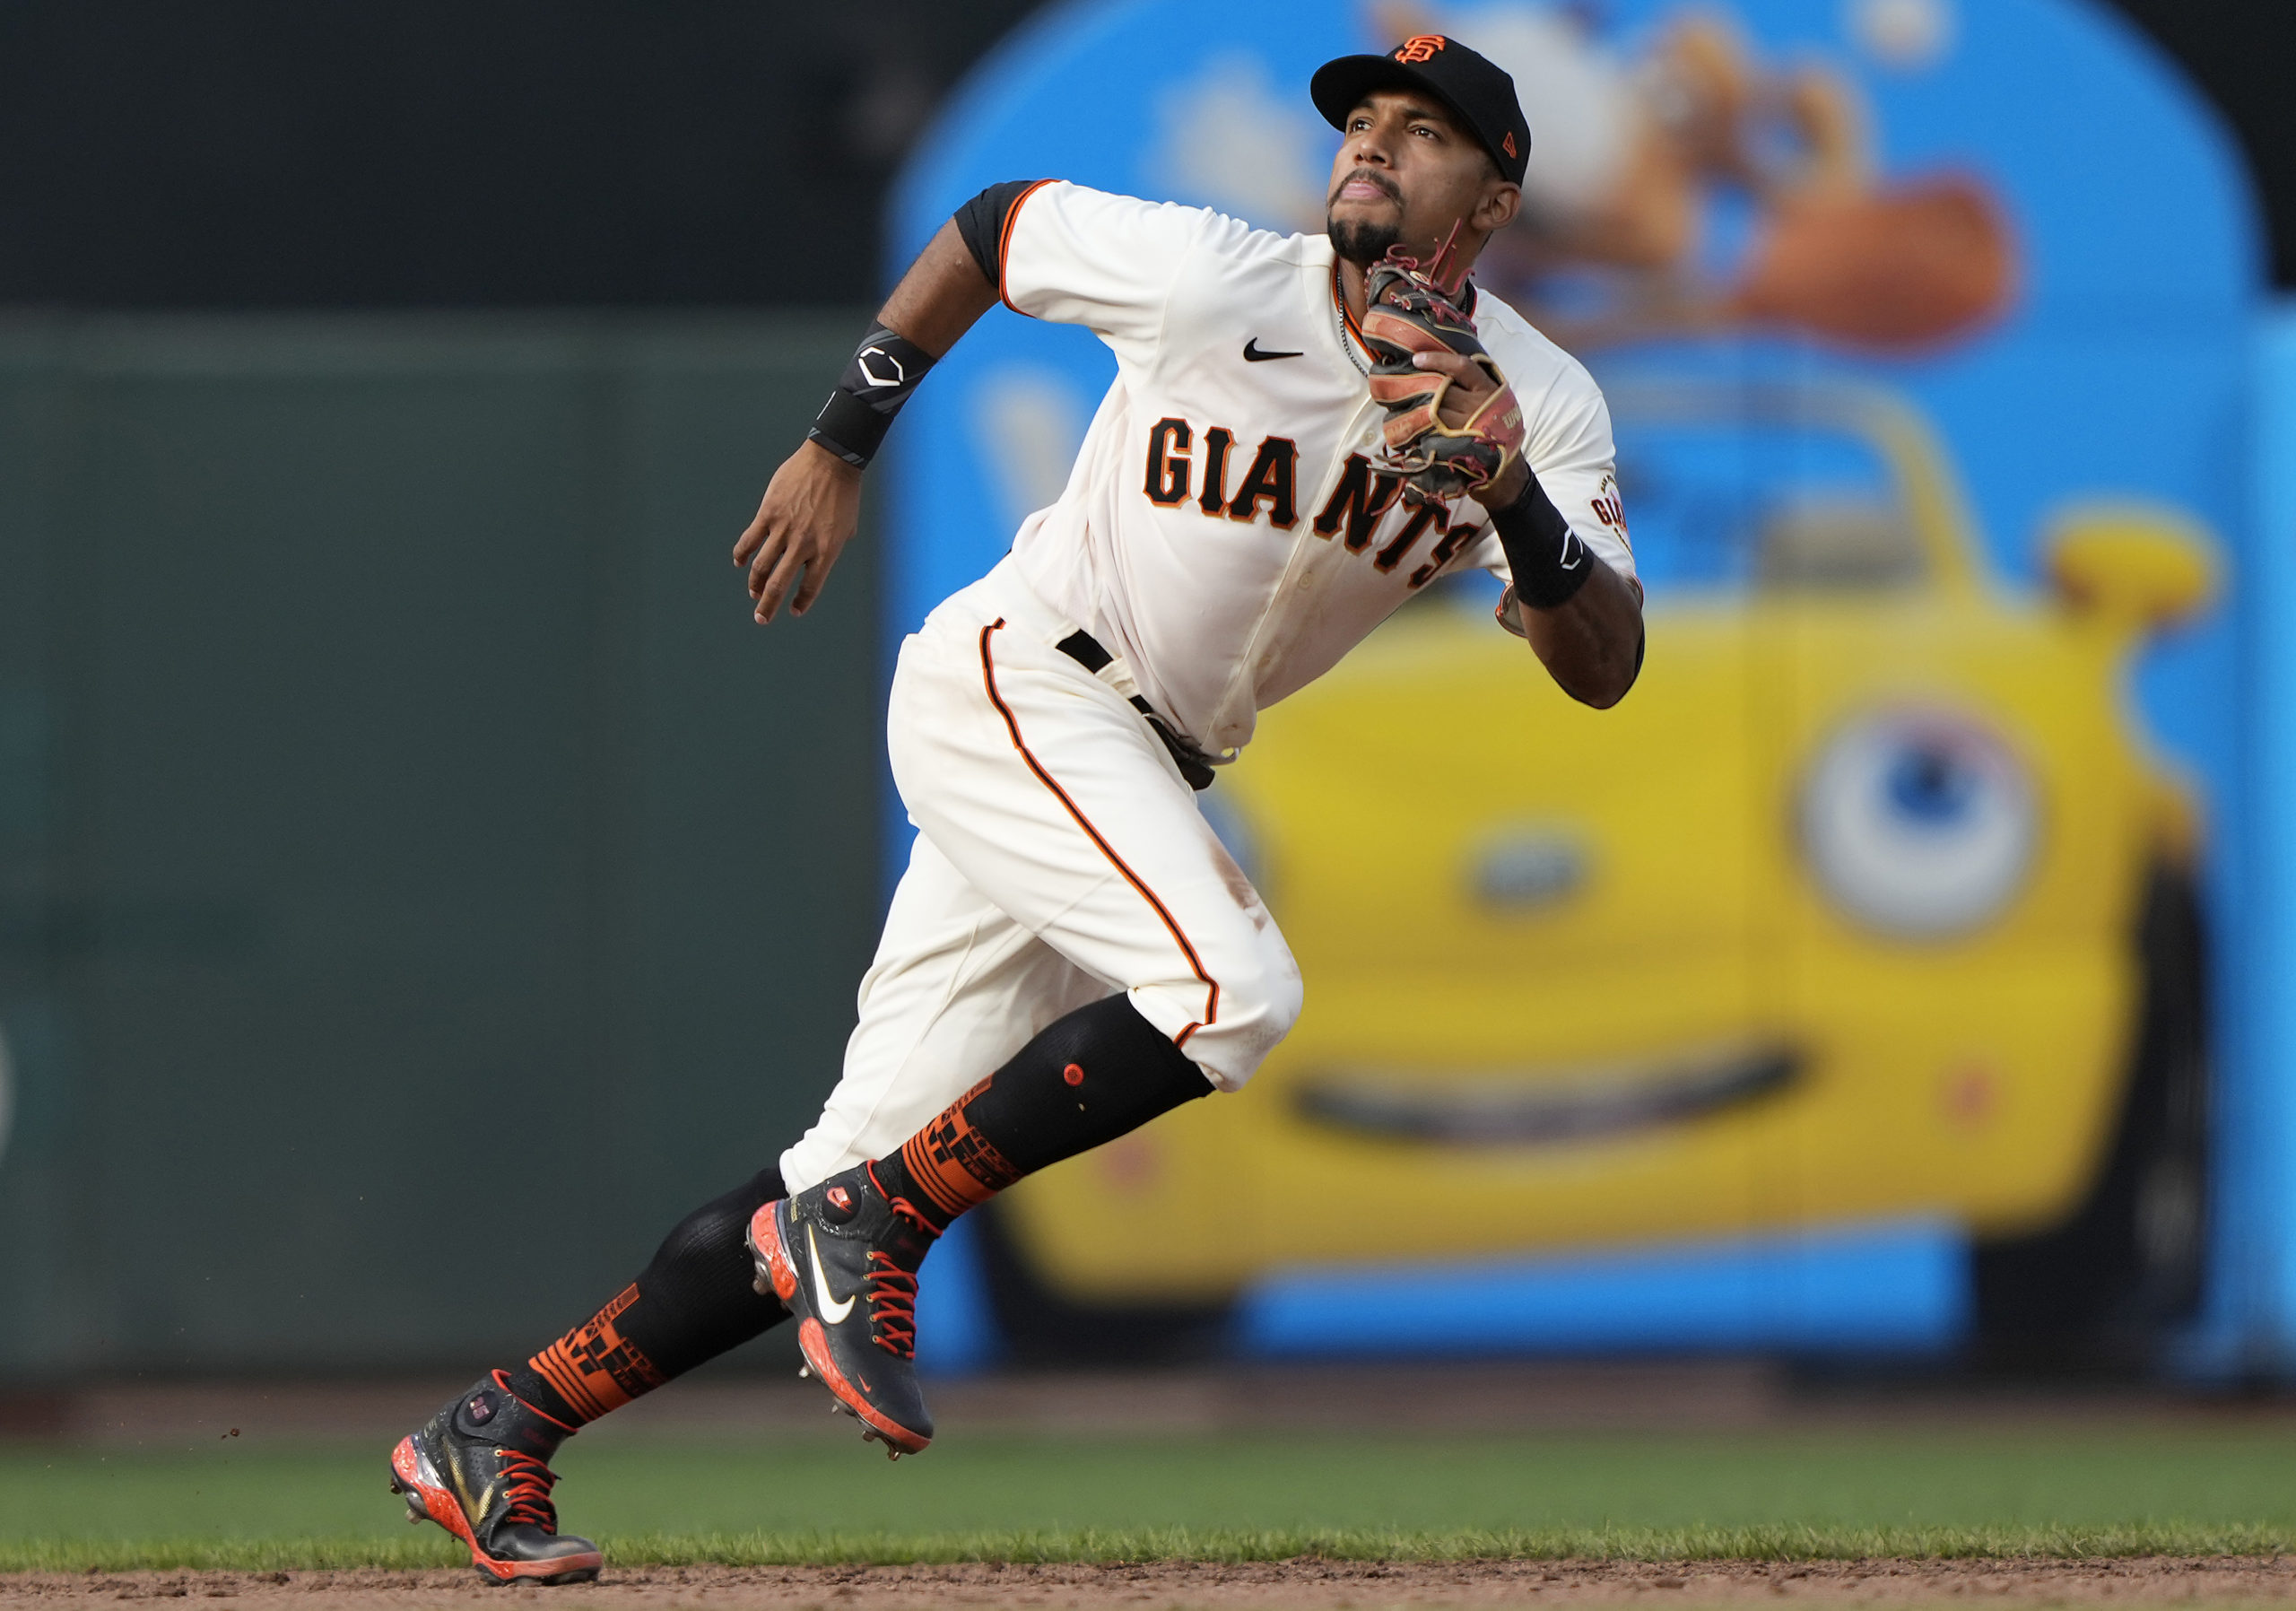 Dixon Machado of the San Francisco Giants chases down a fly ball....